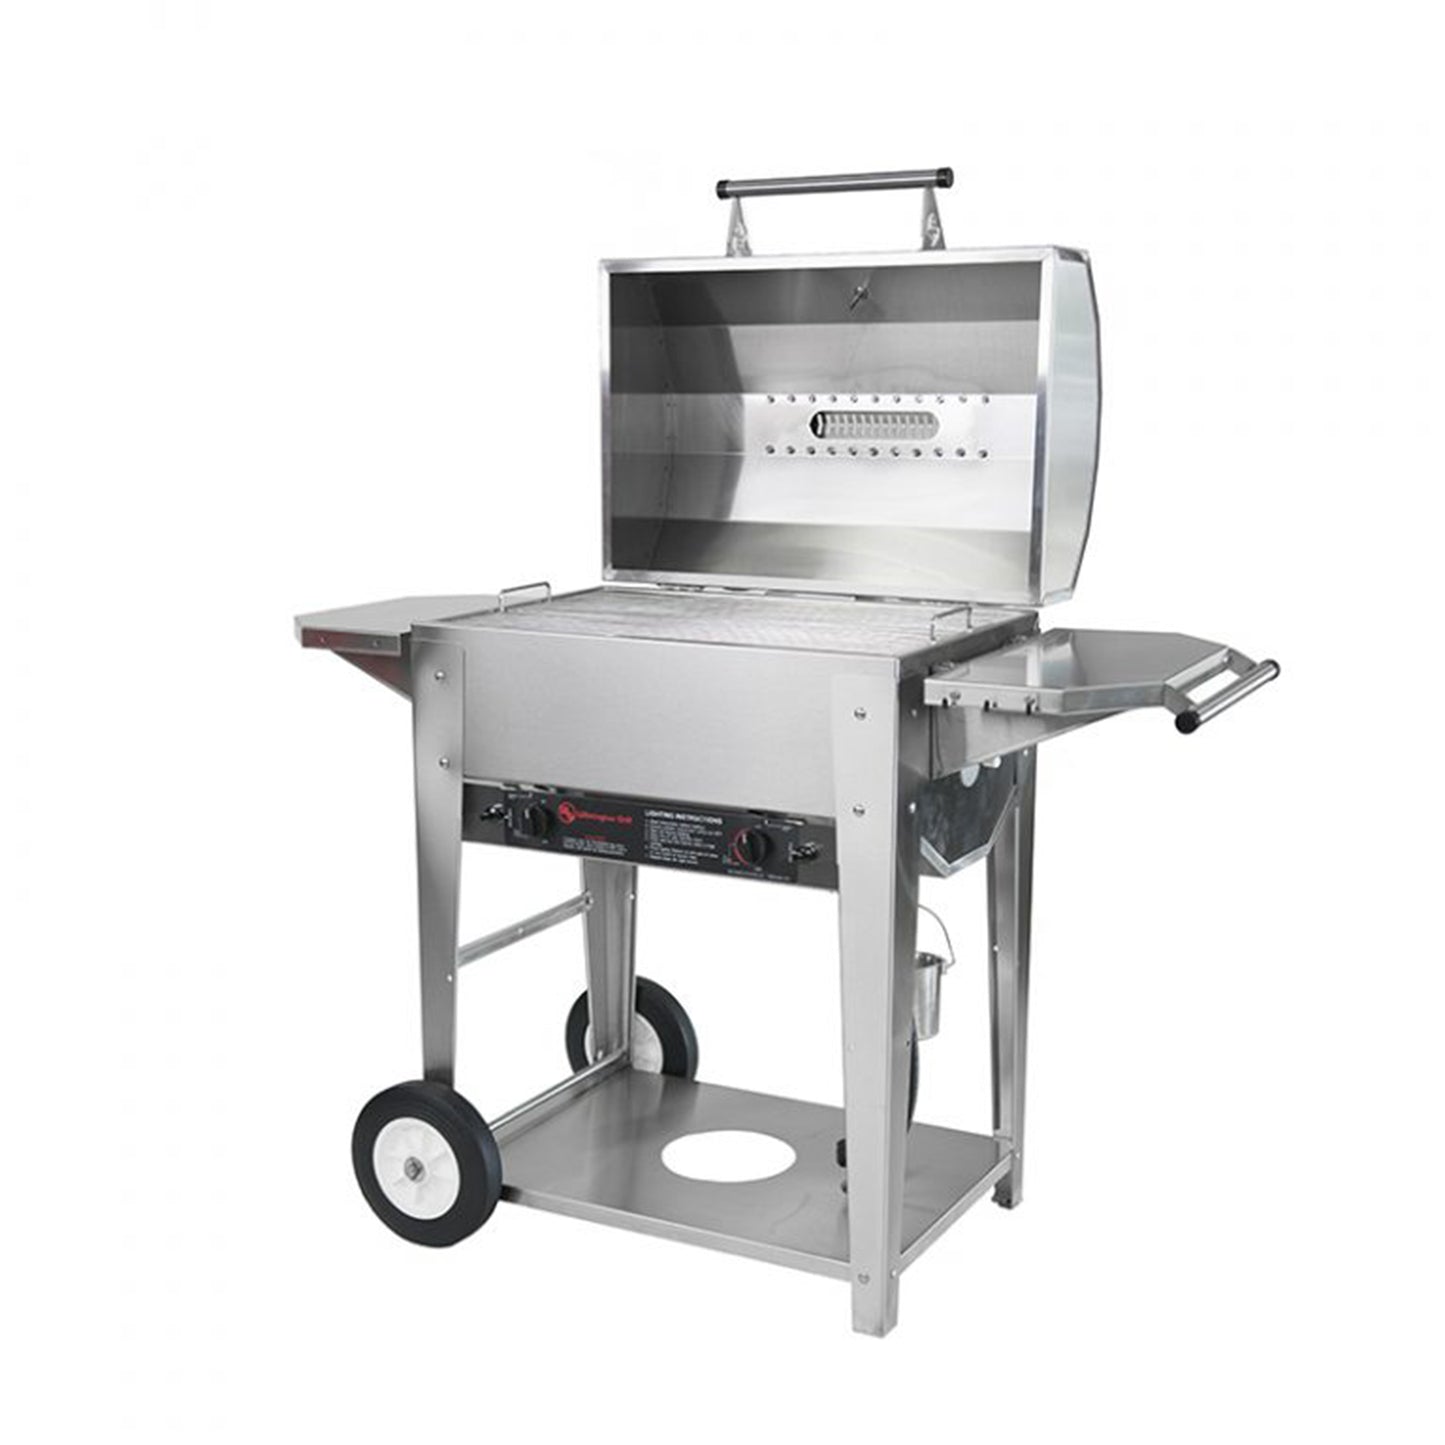 Wilmington Grill Classic Gas Grill